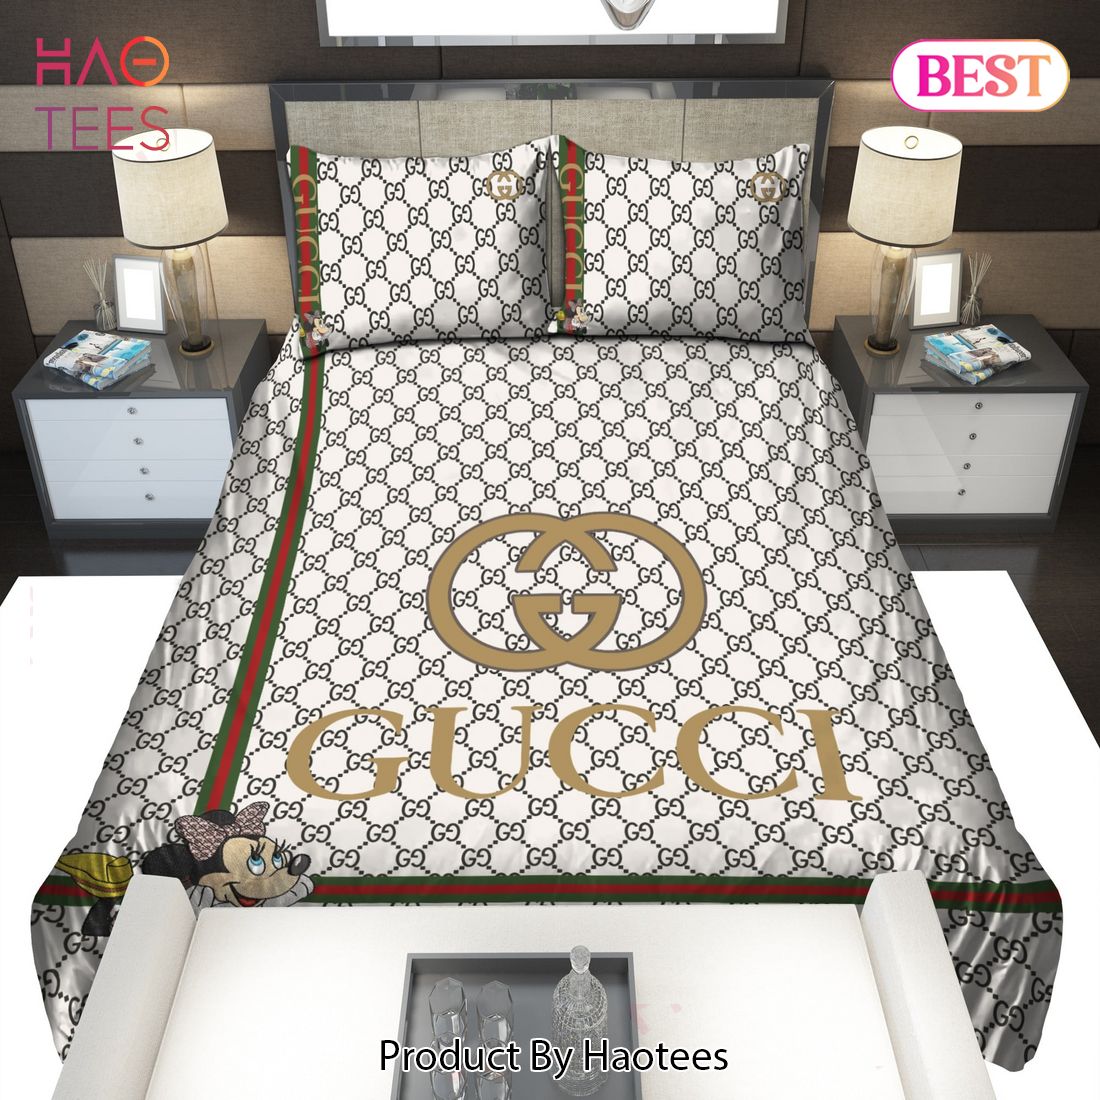 Buy Gucci Louis Vuitton Symbol Bedding Sets Bed Sets With Twin, Full,  Queen, King Size